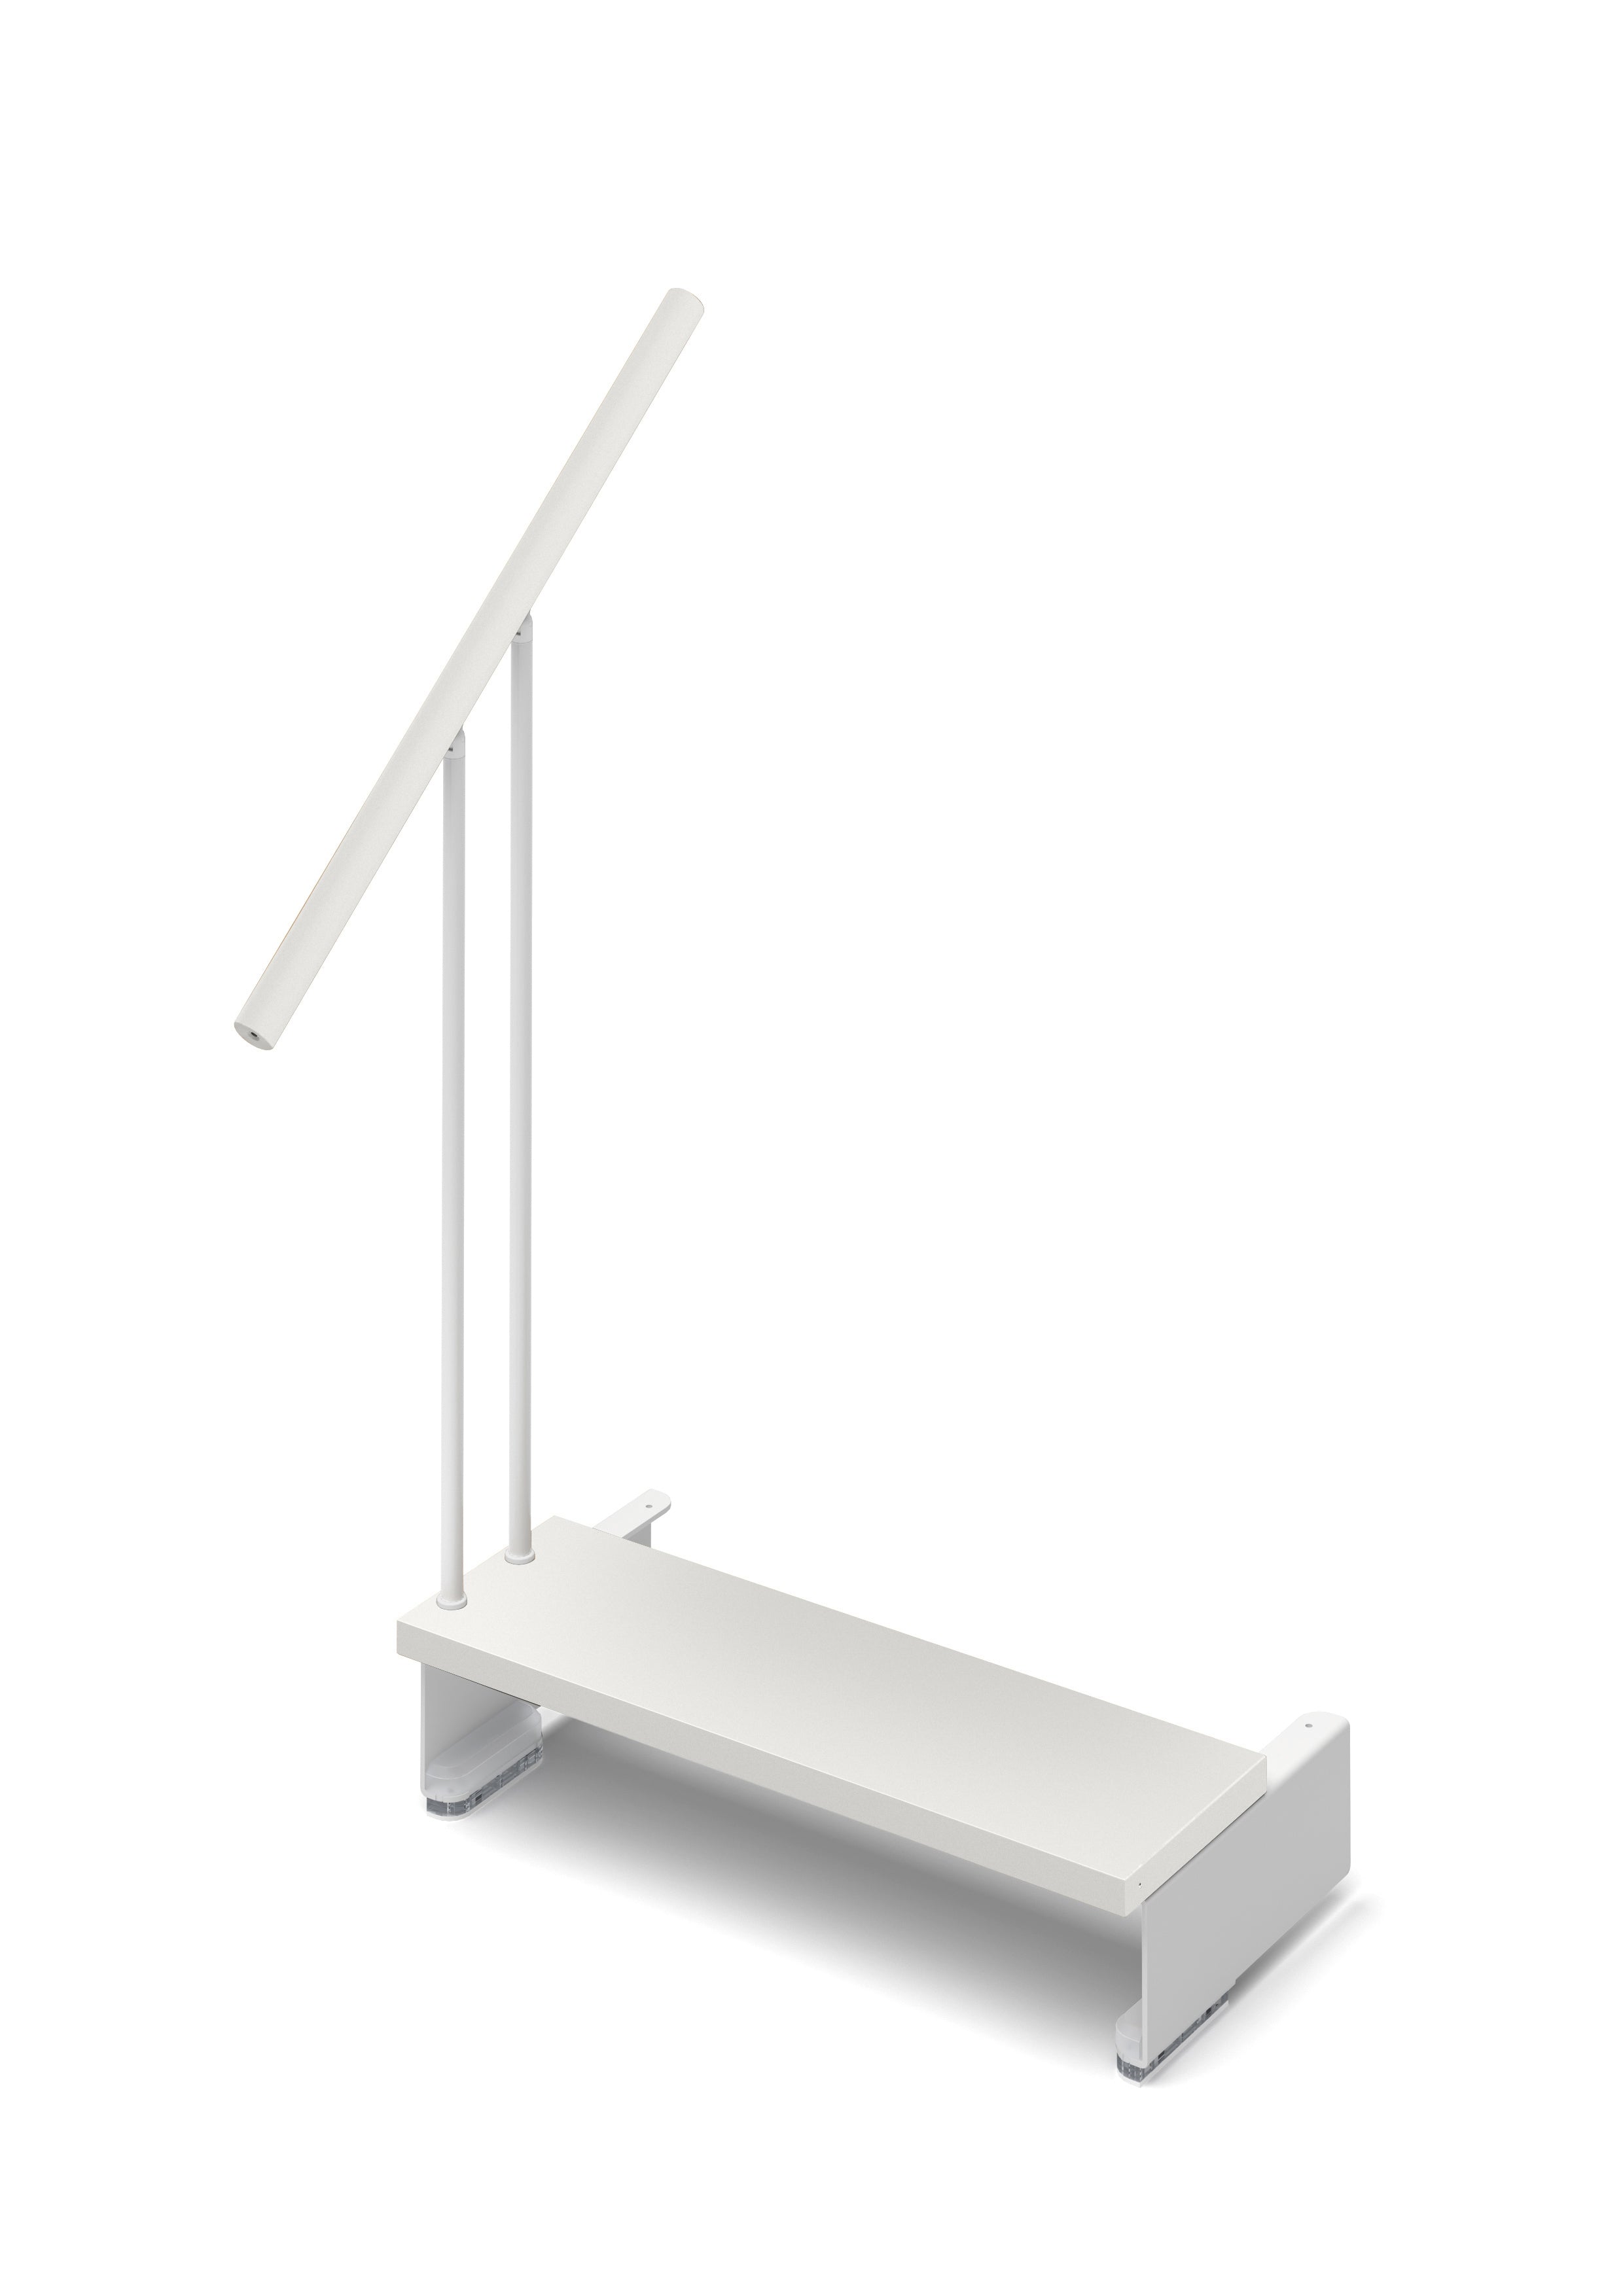 Additional step Adapta 84cm (with structure and railing) - Lacquered White 94